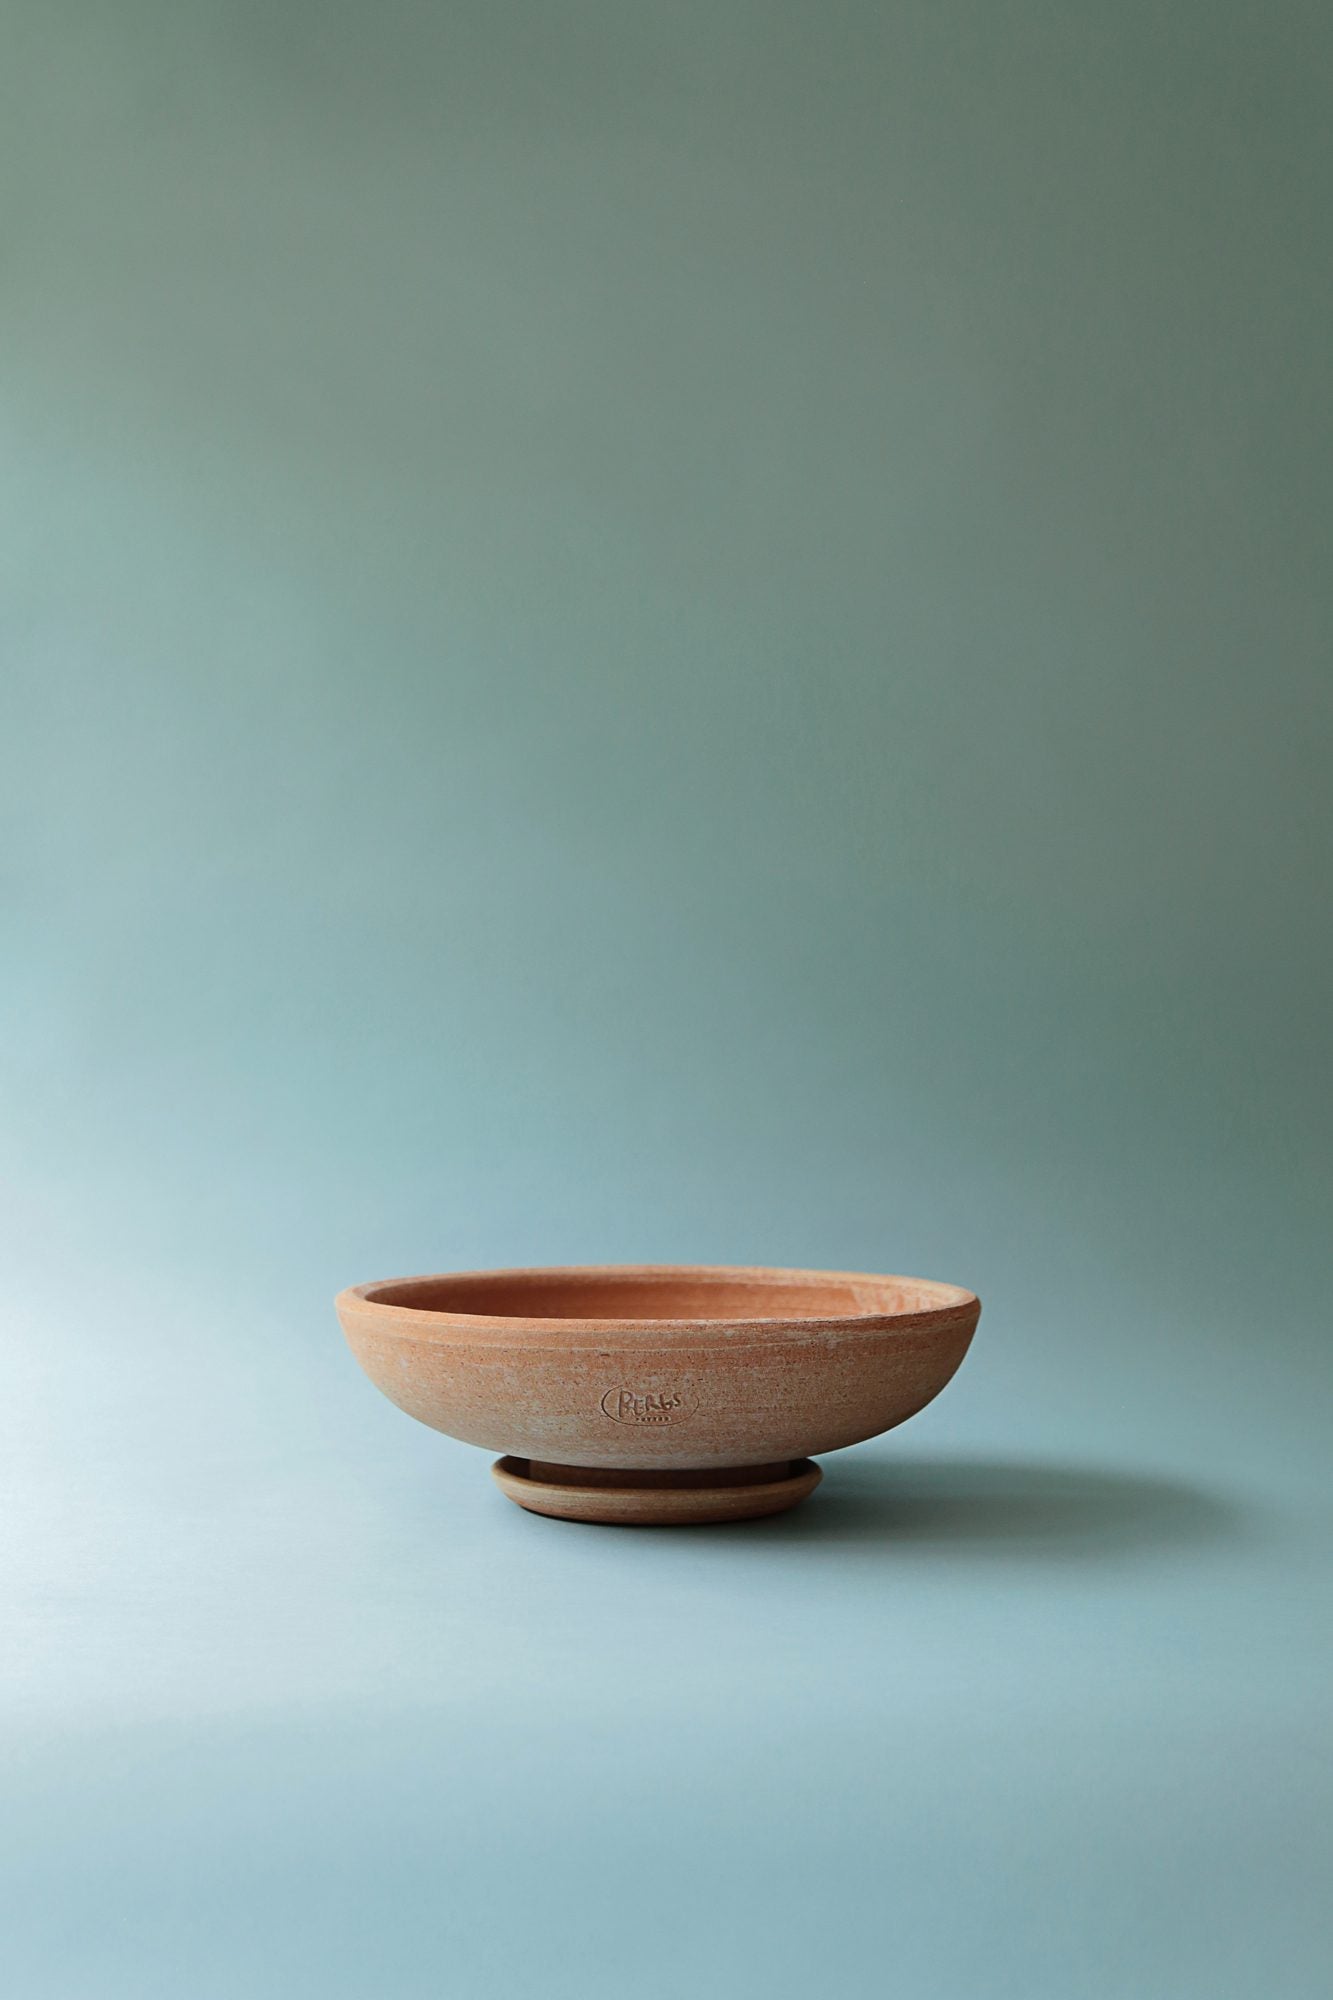 Ada Bowl with Saucer - Raw Rosa - 35cm